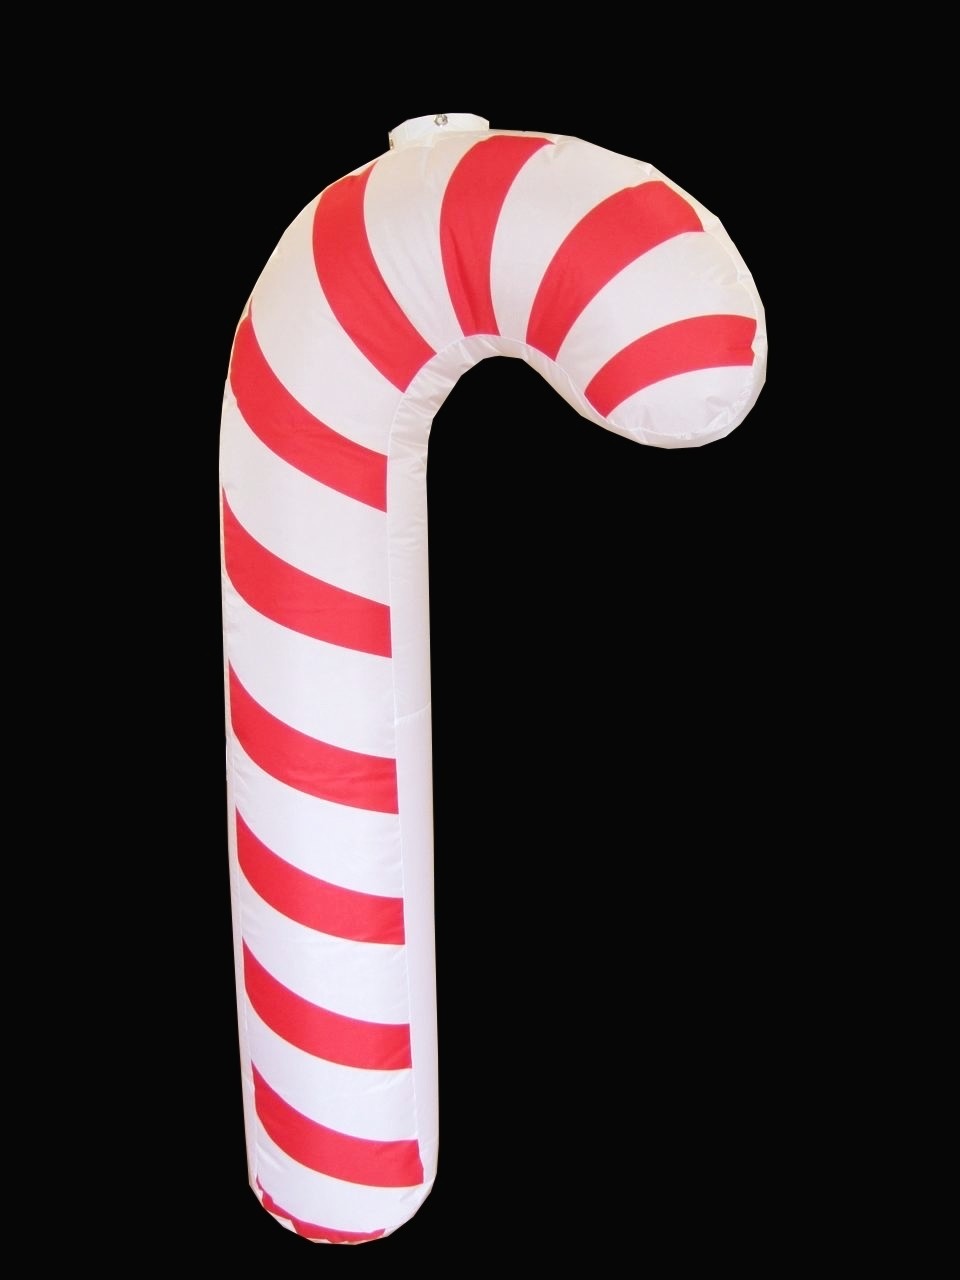 Hanging Inflatable Candy Cane 4ft/122cm x 8.1ft/246cm